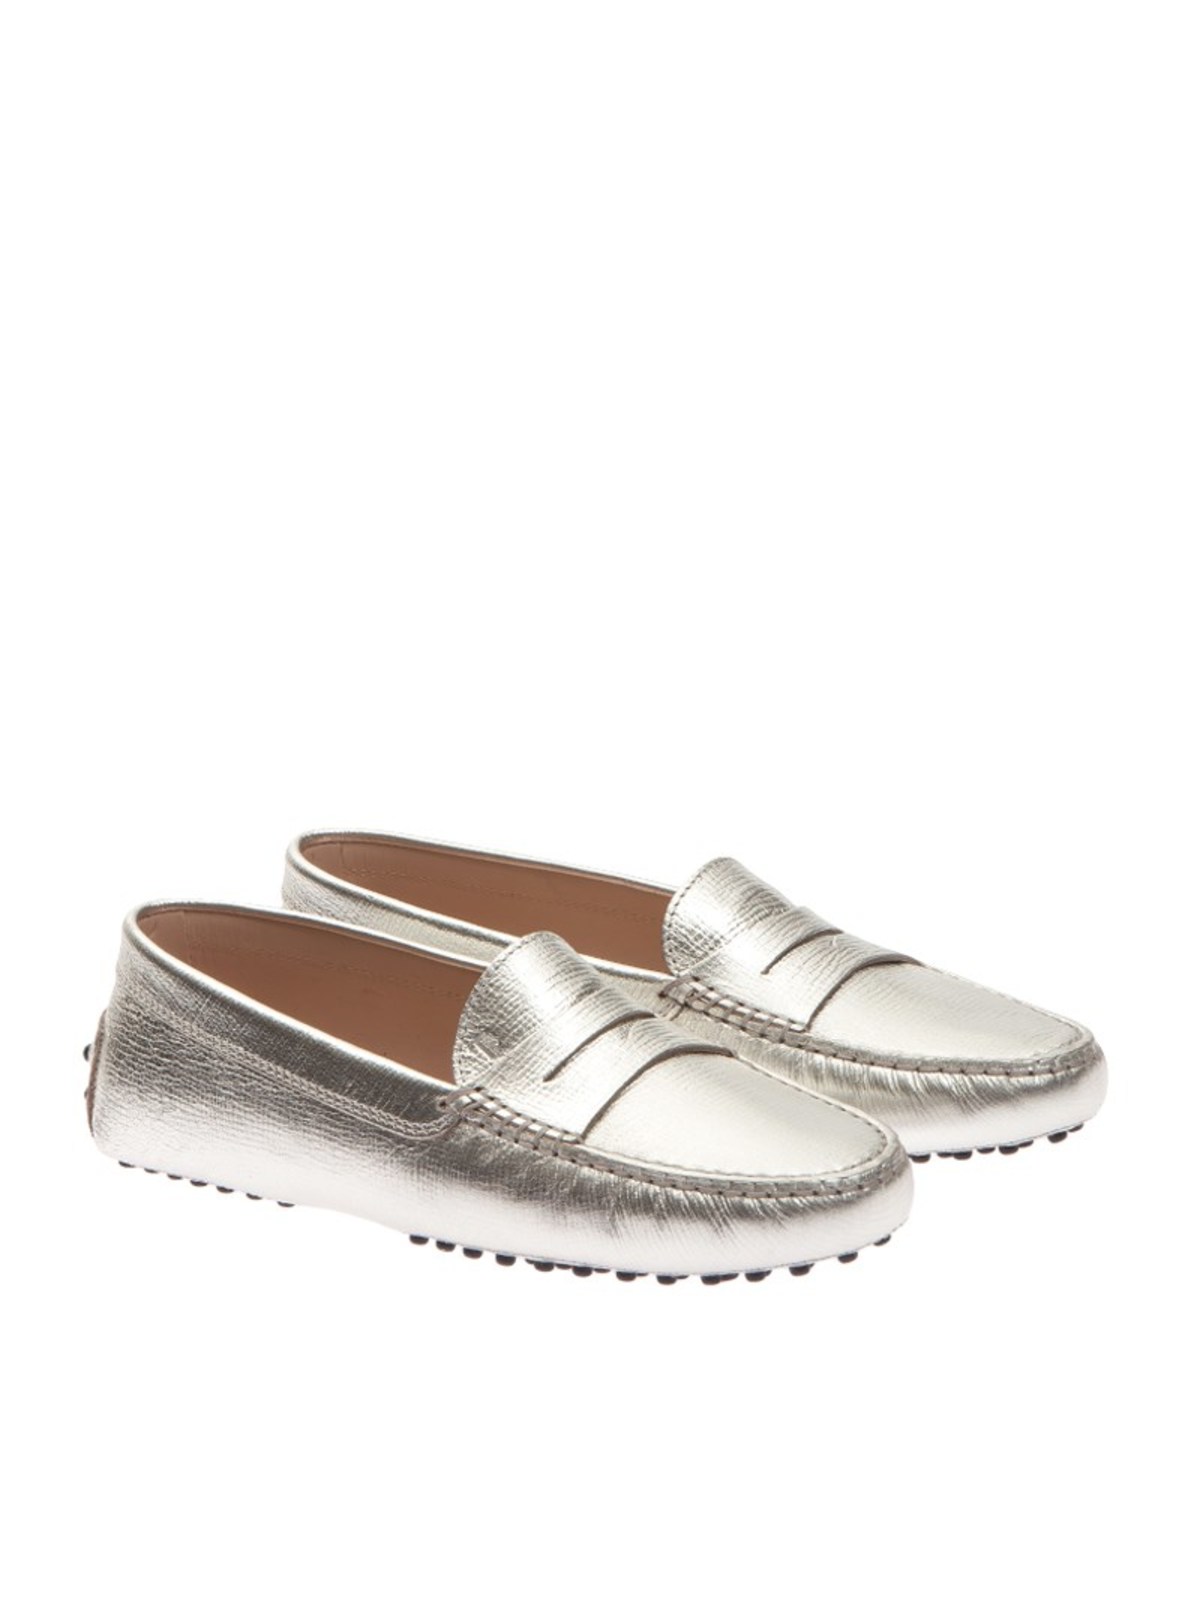 TOD'S LEATHER SILVER LOAFERS